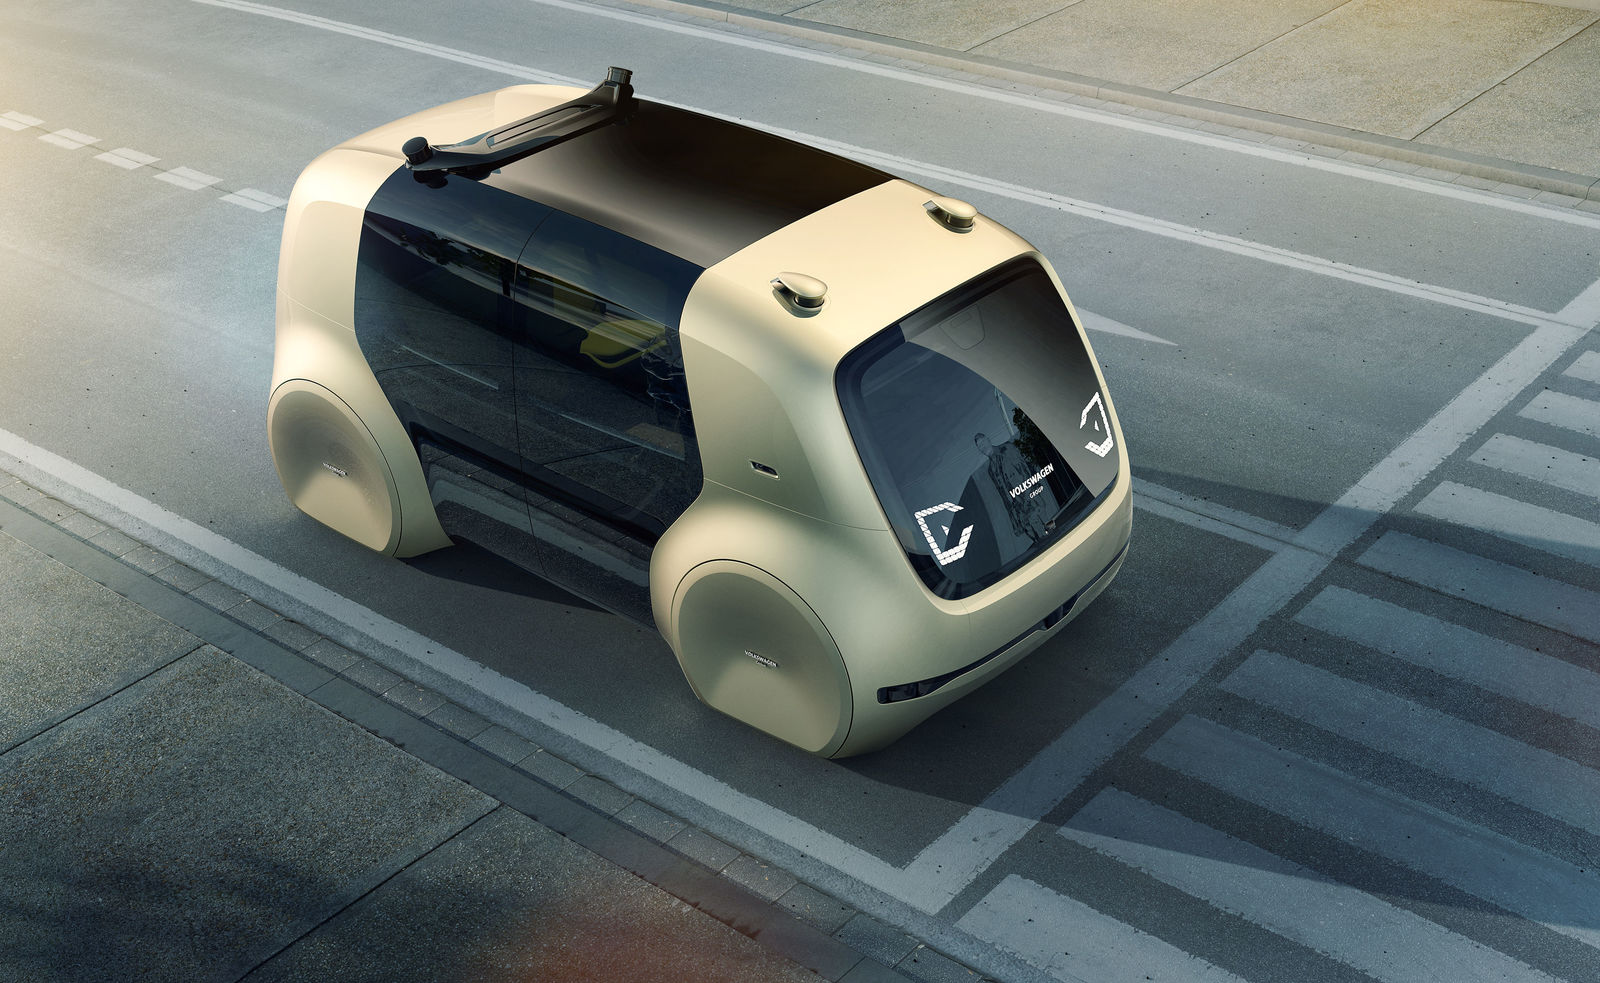 SEDRIC – Concept Car from the Volkswagen Group and cross-brand ideas platform.